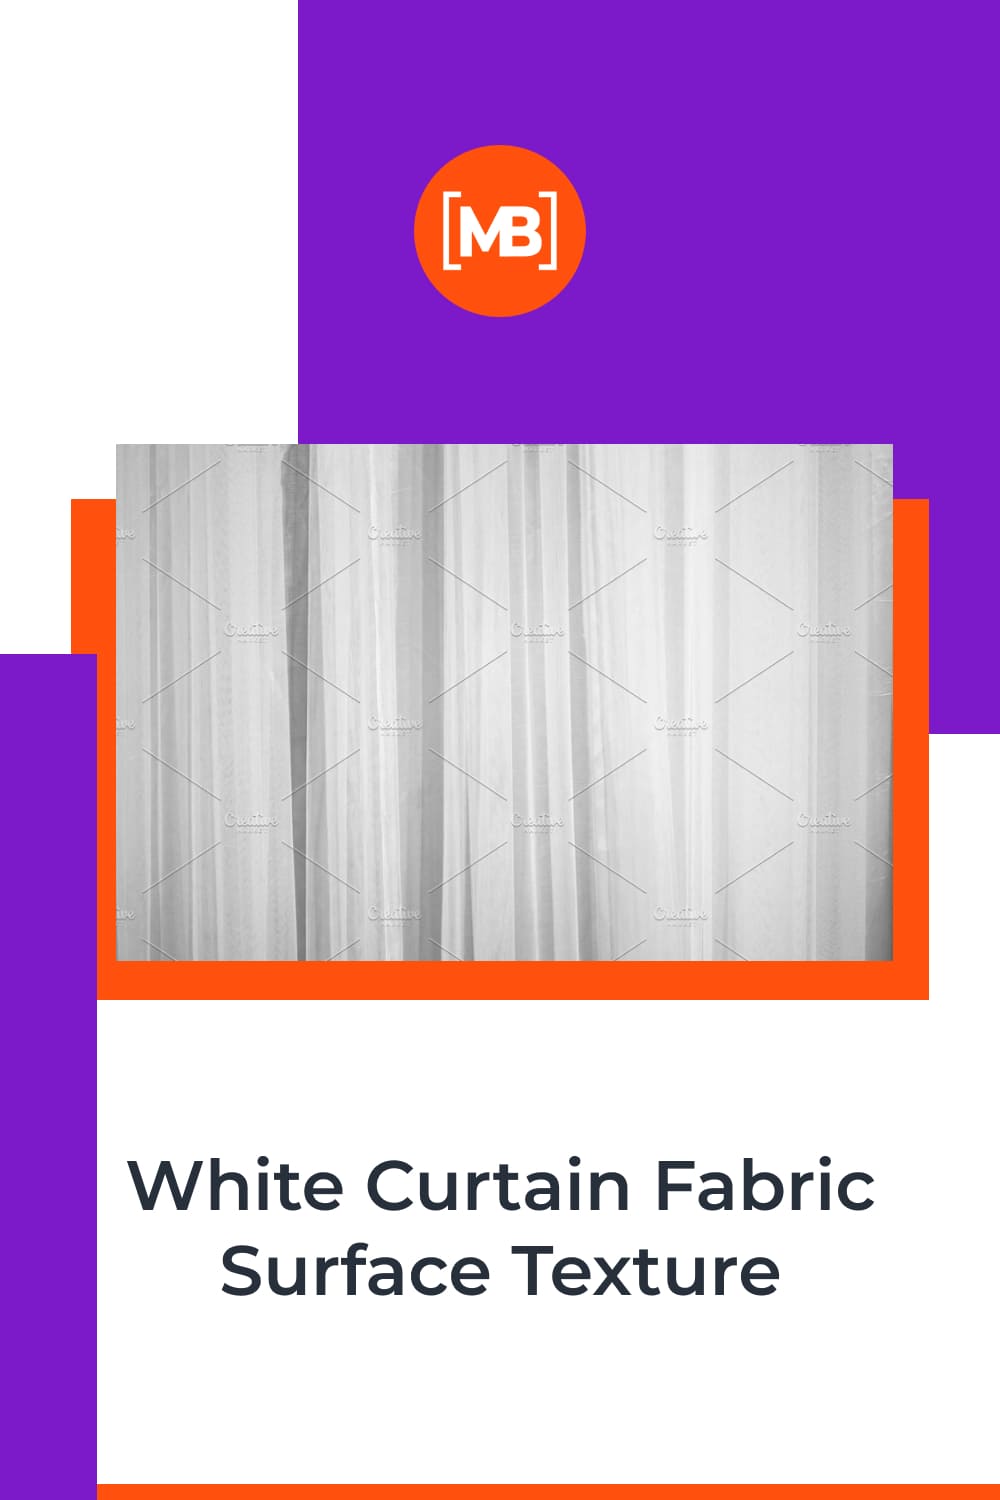 White curtain fabric surface texture.